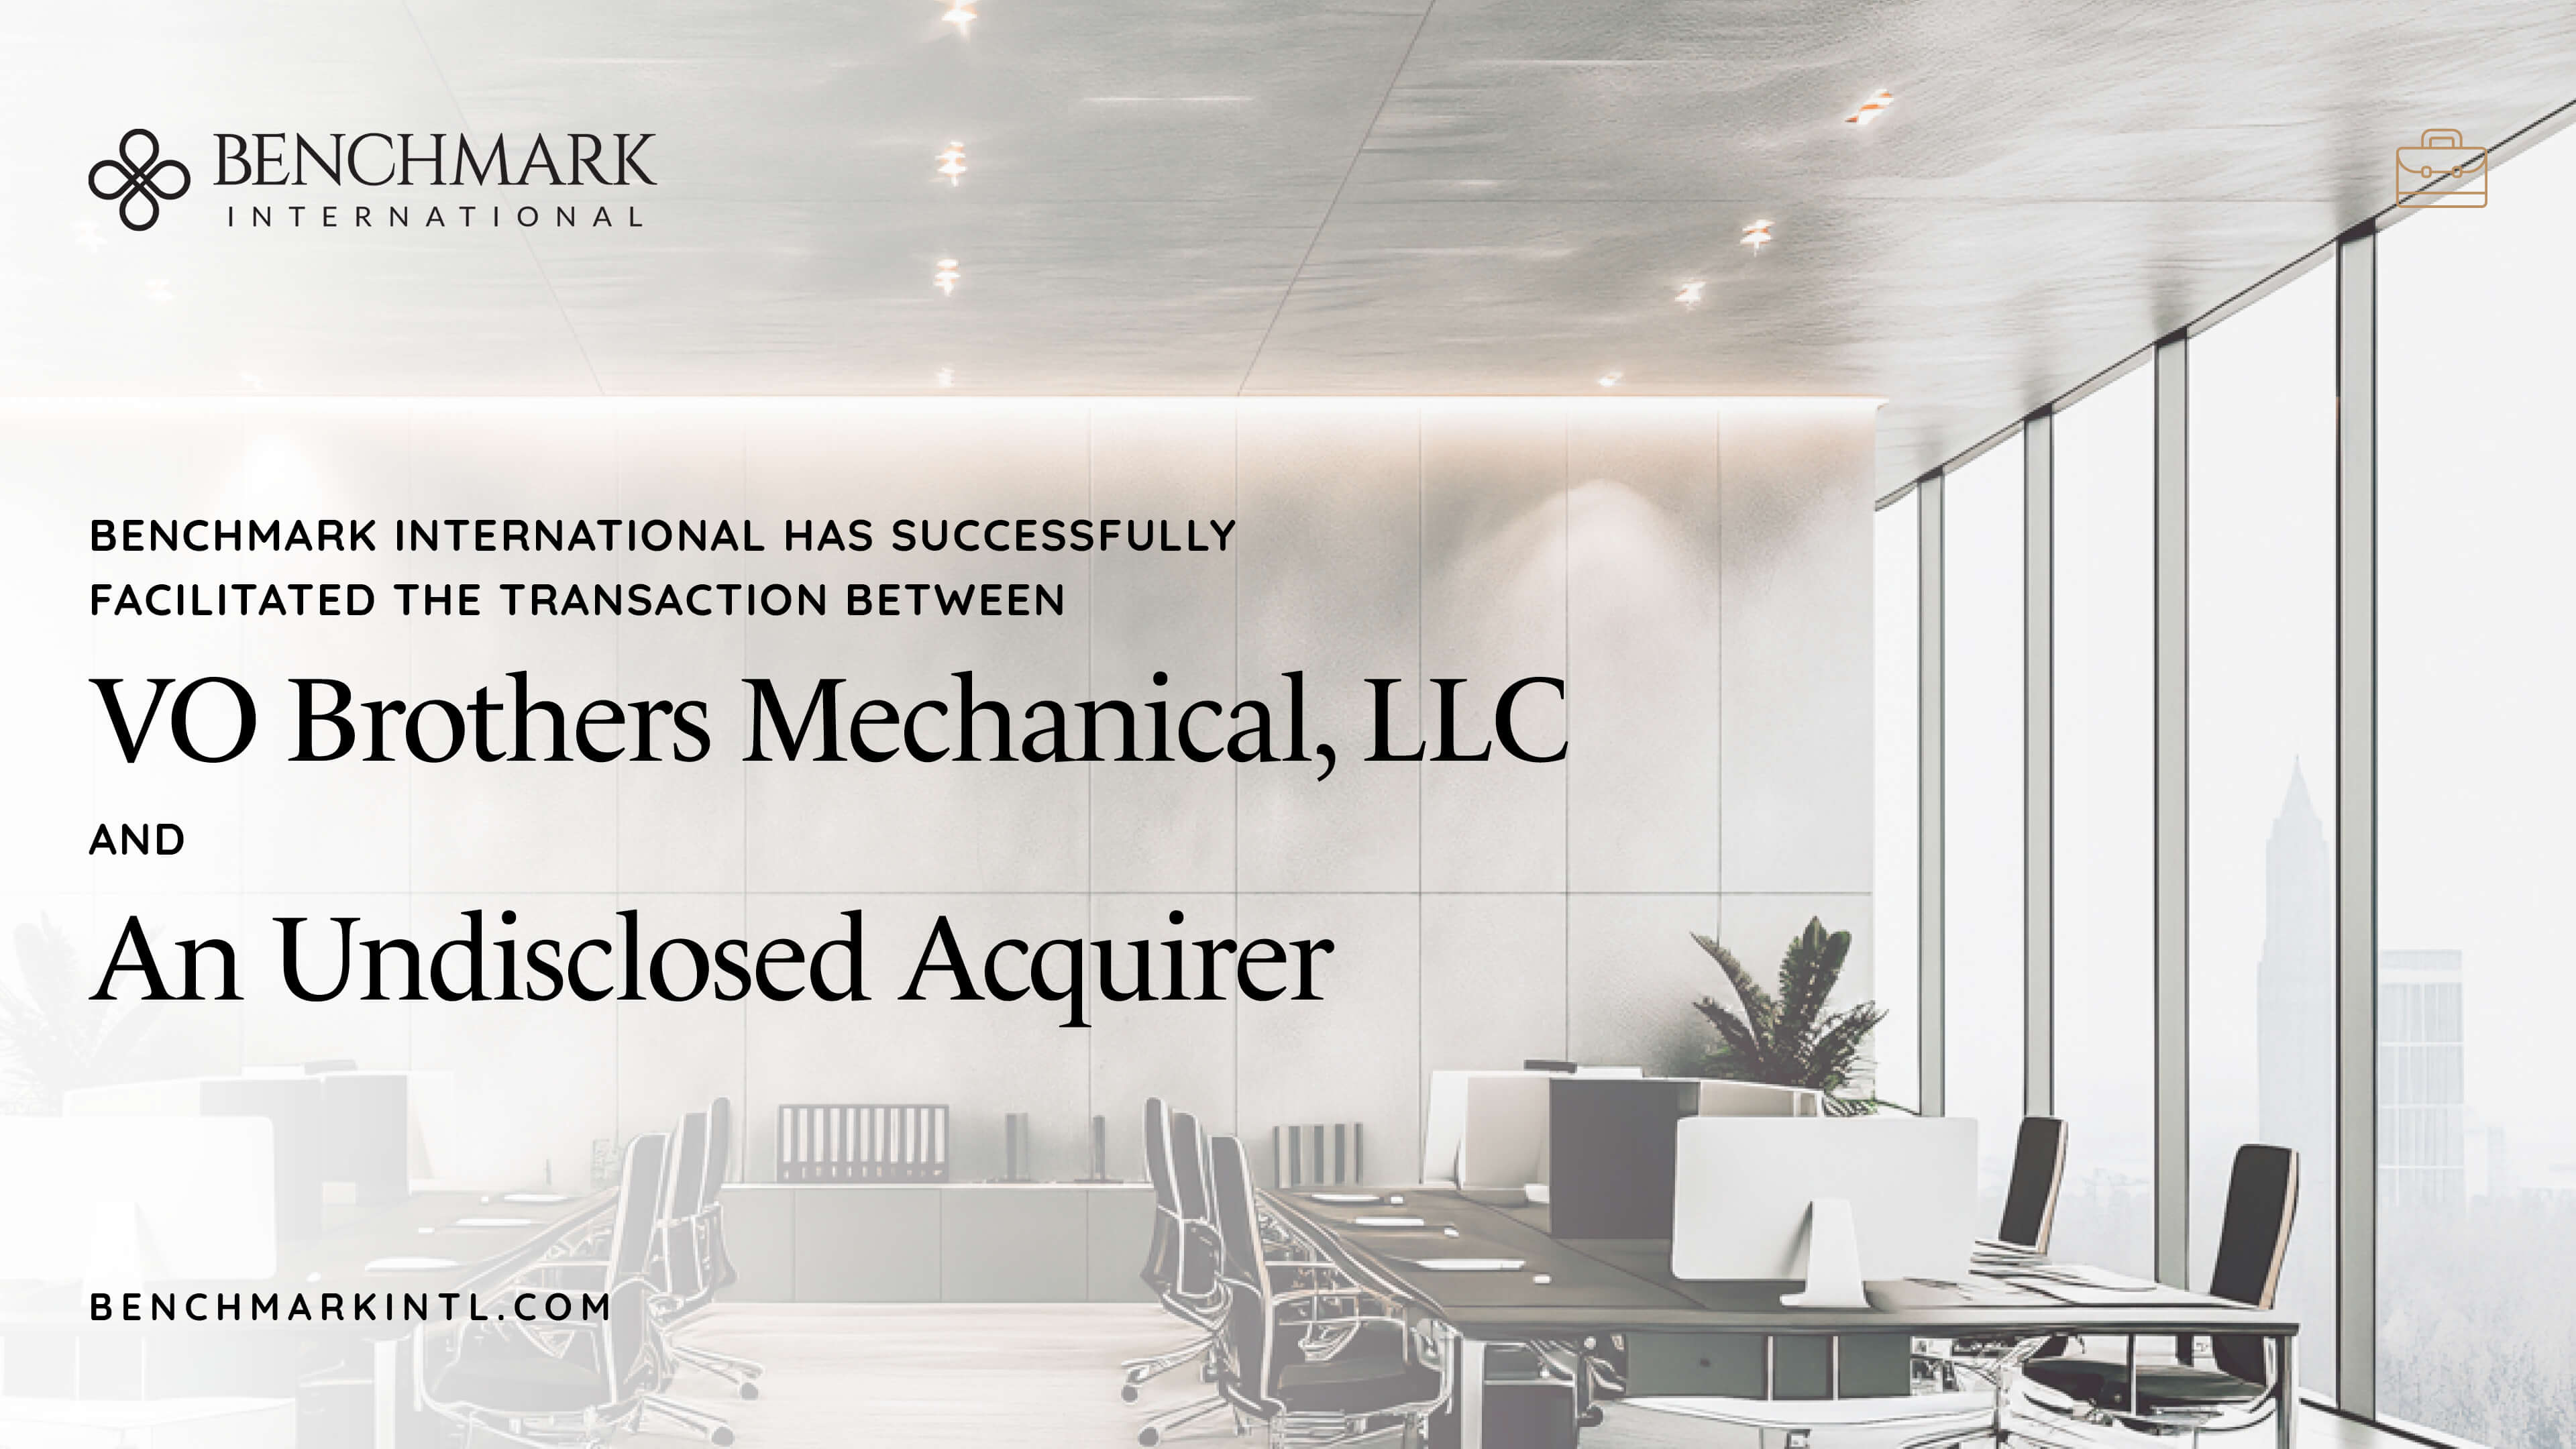 Benchmark International Has Successfully Facilitated The Transaction Between VO Brothers Mechanical, LLC And An Undisclosed Acquirer